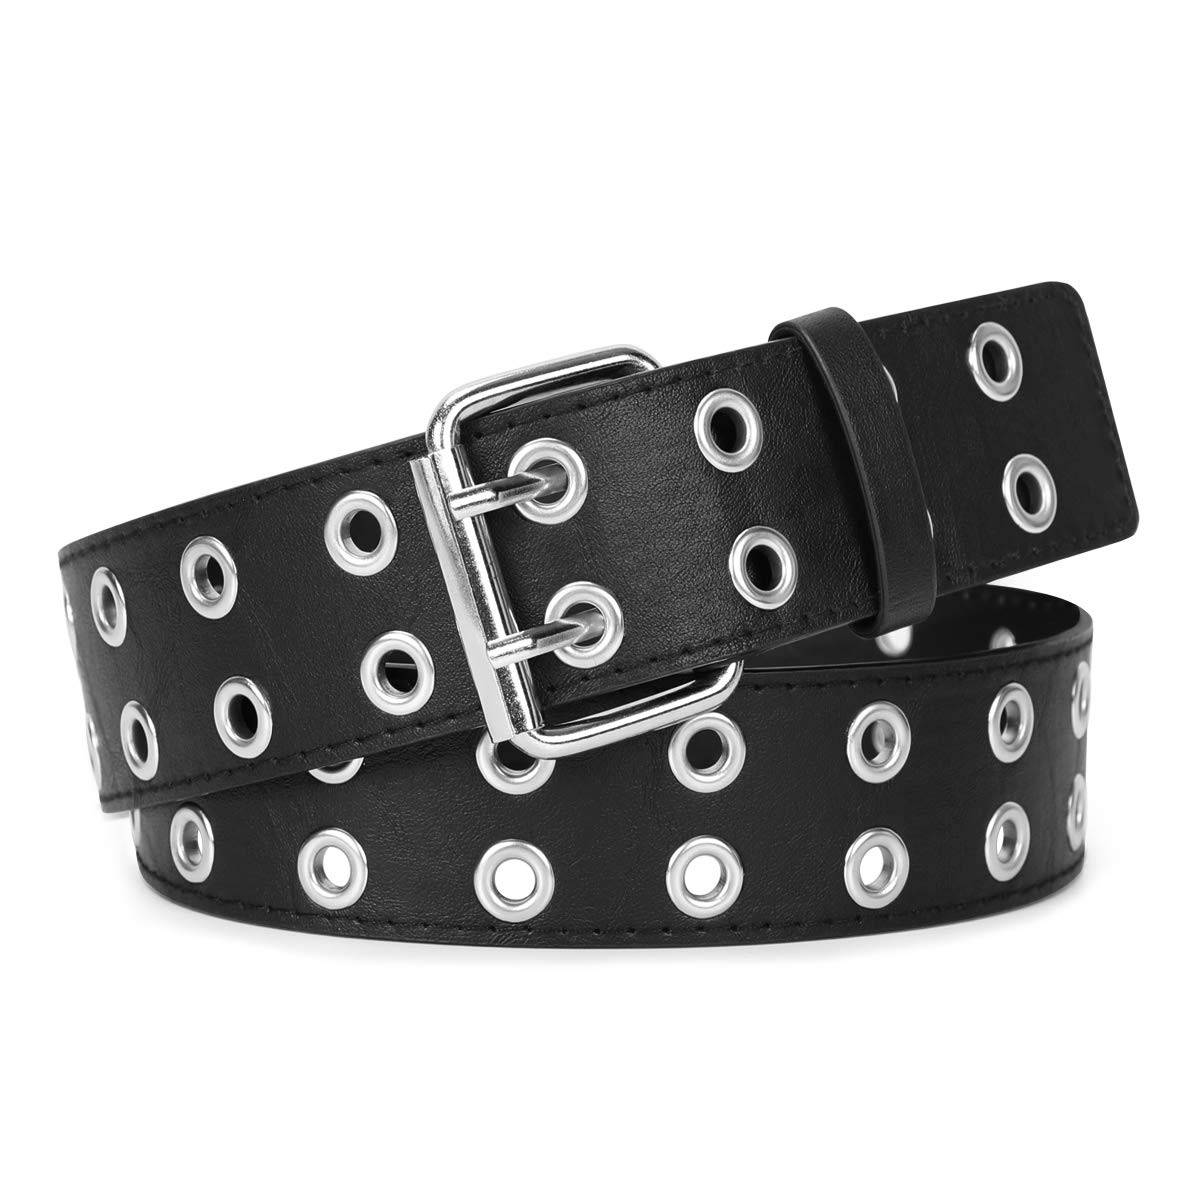 Plus Size Double O Ring Belt for Women Leather Belt,Ladies PU